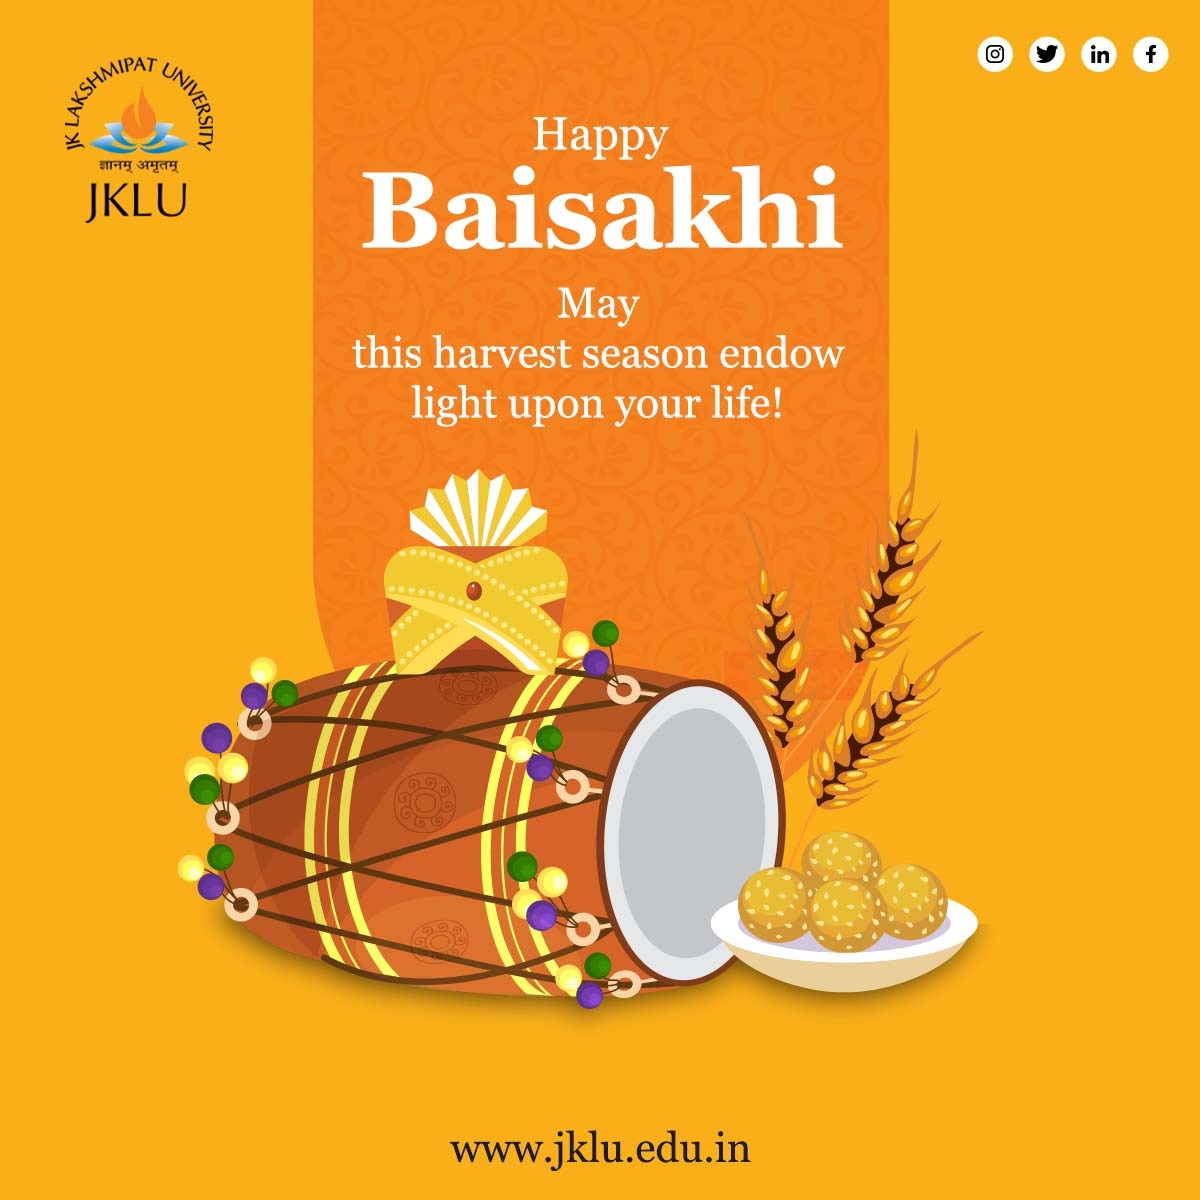 May this cheerful festival of Baisakhi bring Happiness, Prosperity, and Joy in your Life.

The #JKLUFamily wishes you a blissful Baisakhi. 

#baisakhi #newstart #lunarcalender #festivities #prayer #innerpeace #joy #prosperity #IndianFestivals #Festiveseason